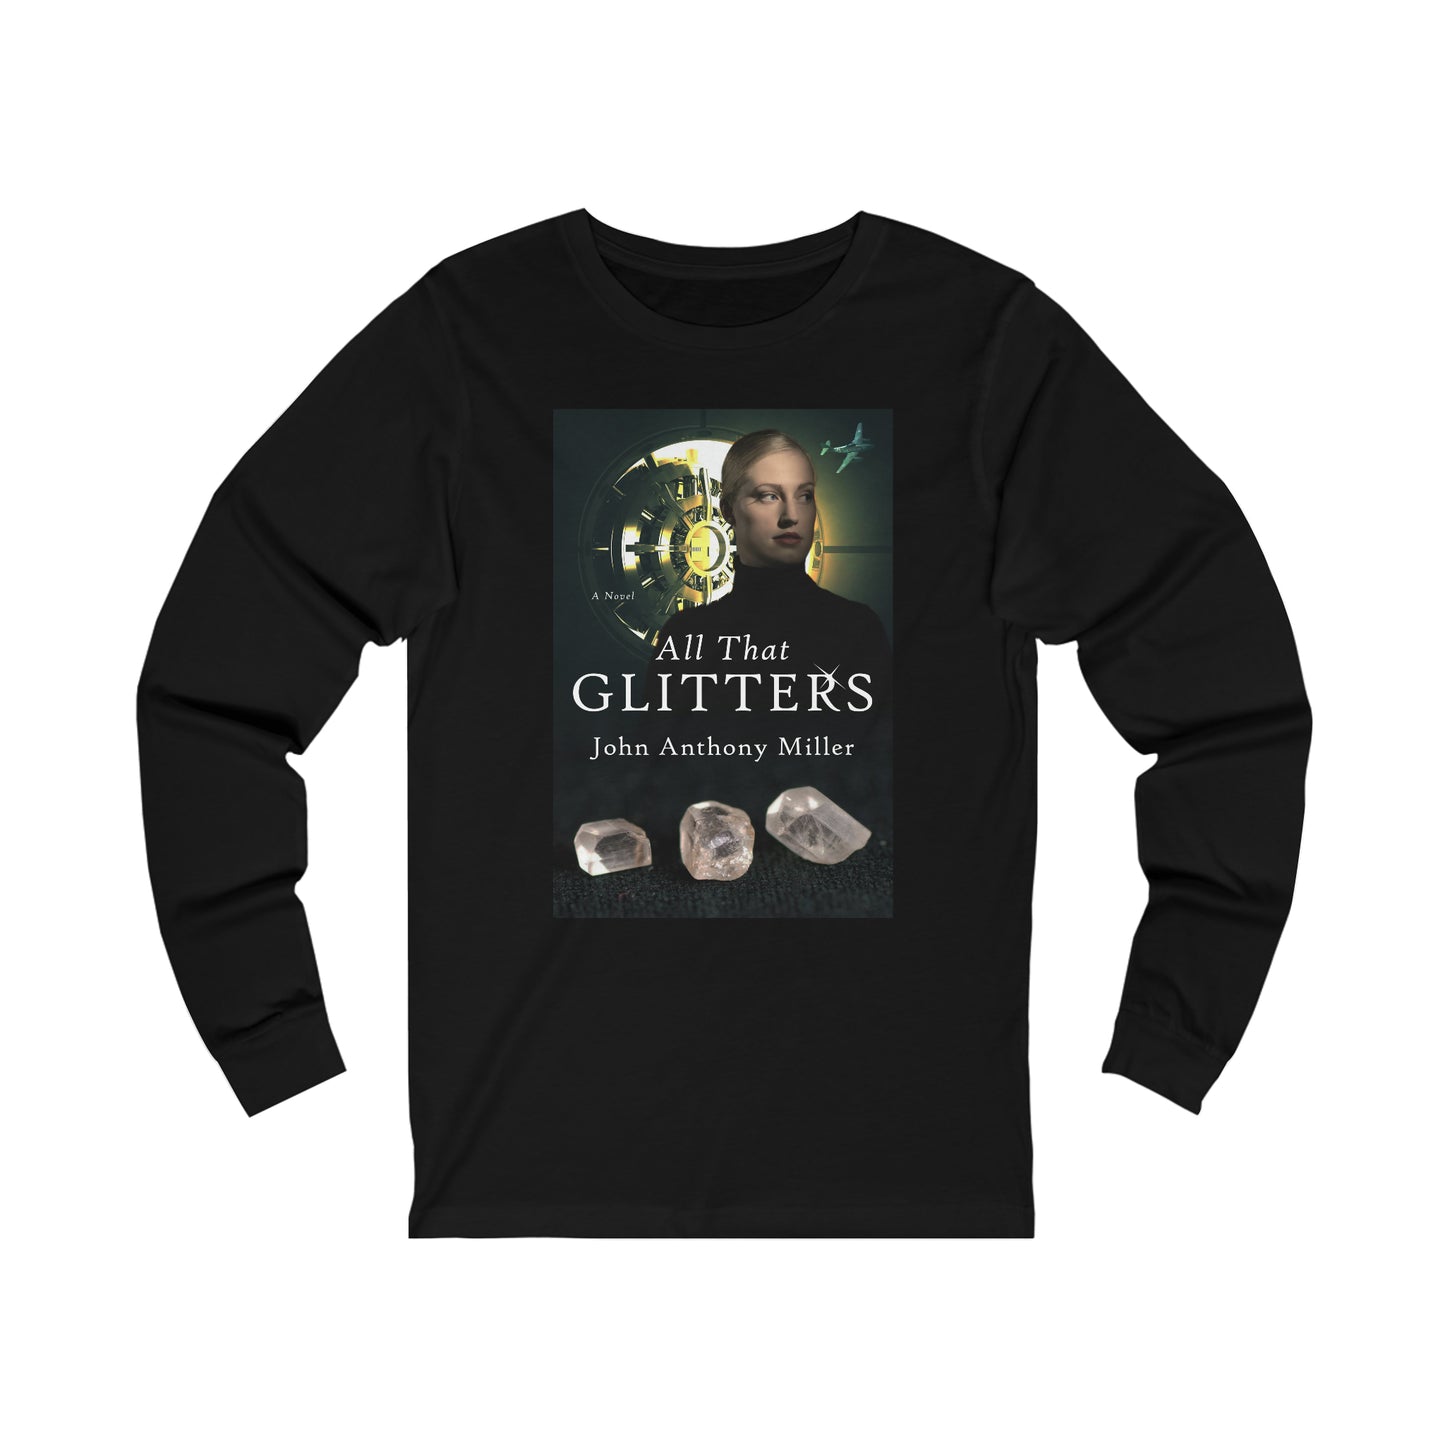 All That Glitters - Unisex Jersey Long Sleeve Tee